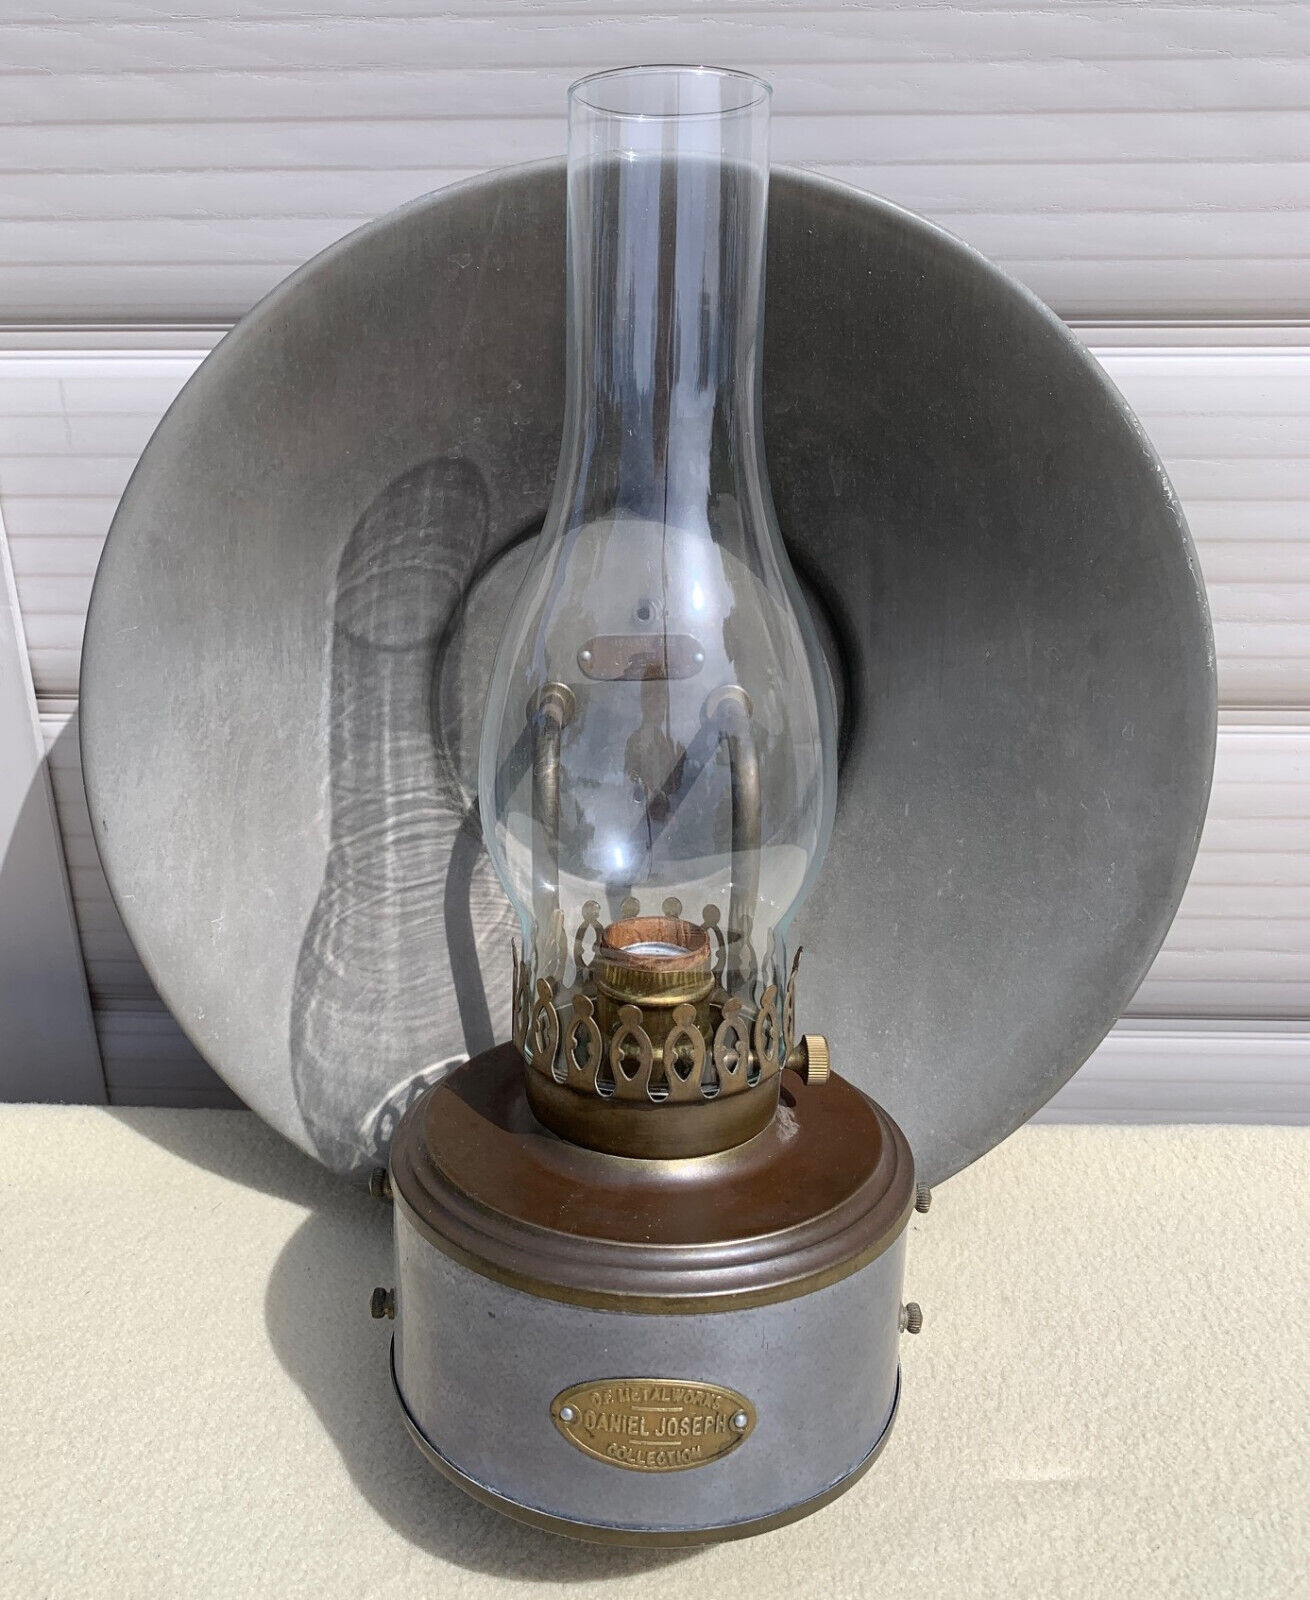 Vintage David Joseph Handcrafted Electric Wall Lamp